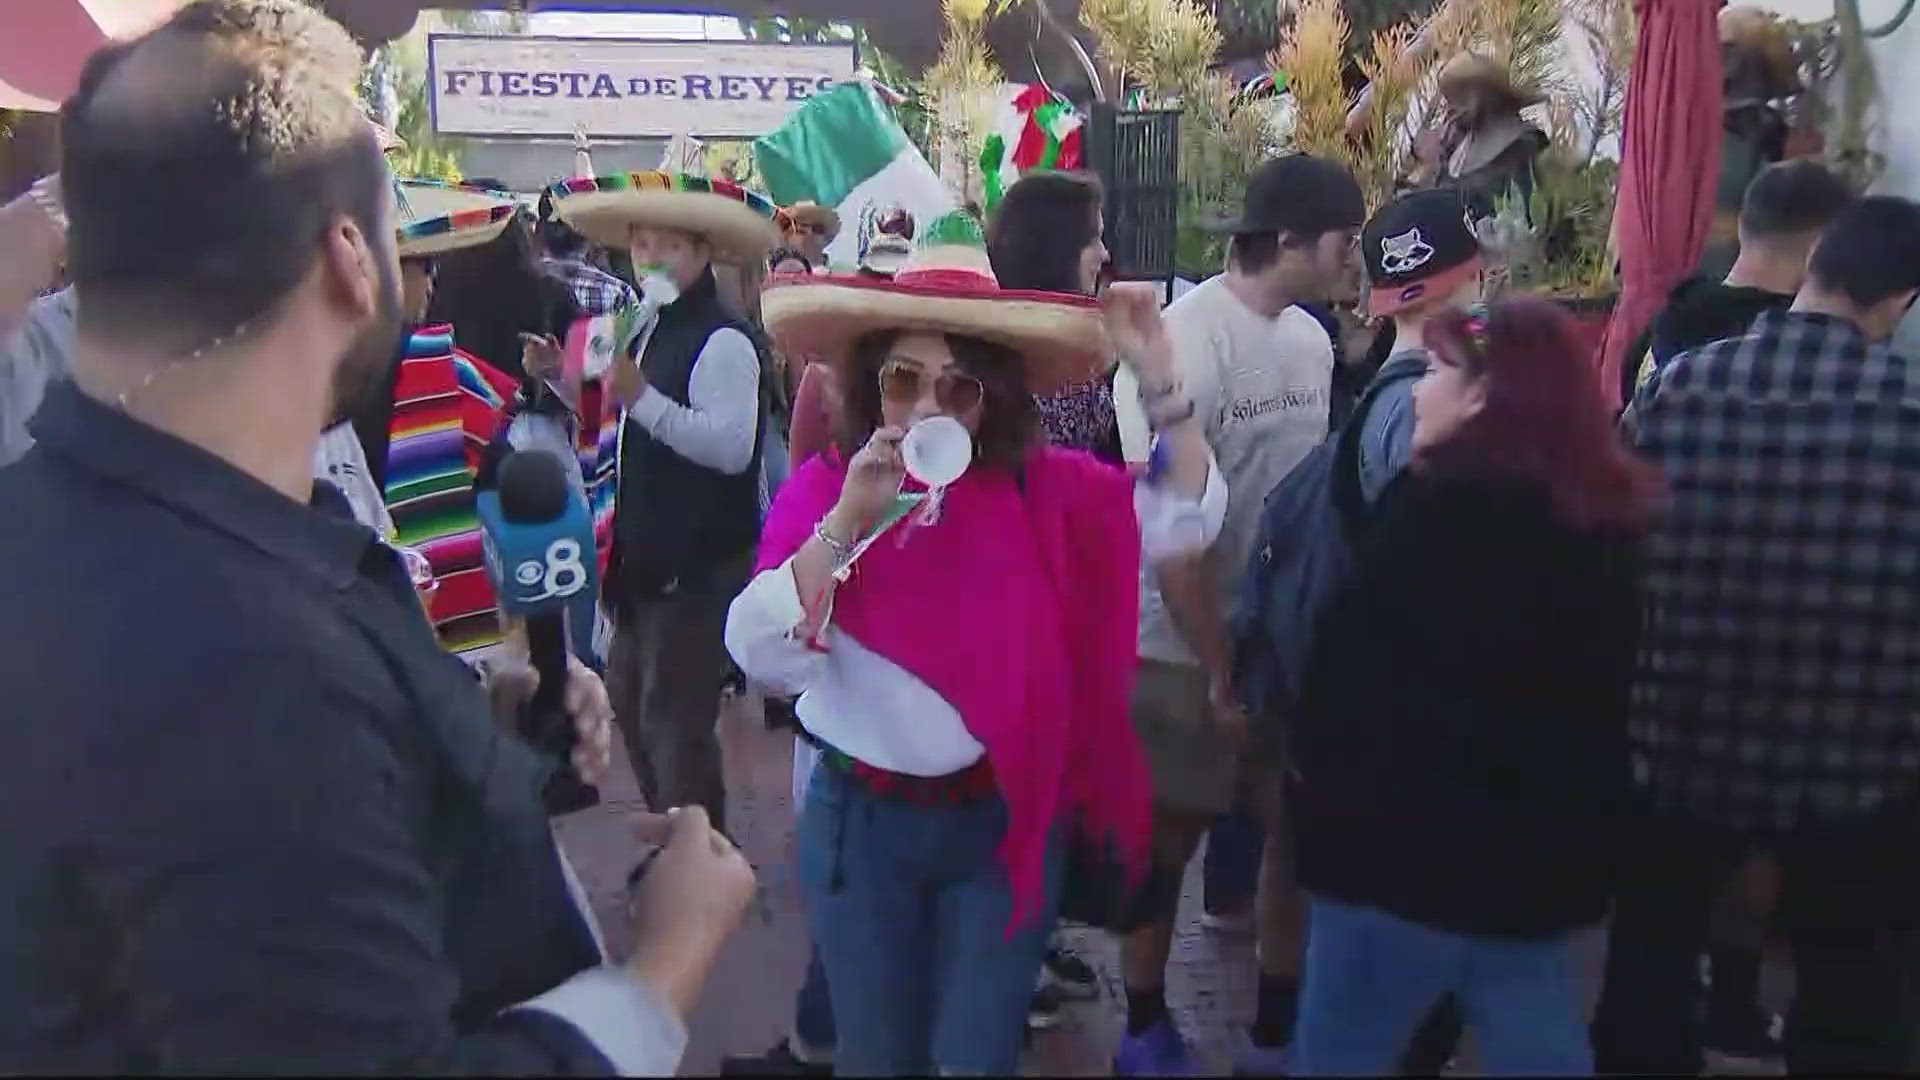 CBS 8 checks in with people and businesses in Old Town during Cinco de Mayo celebrations that will continue through the weekend, May 5 - May 7